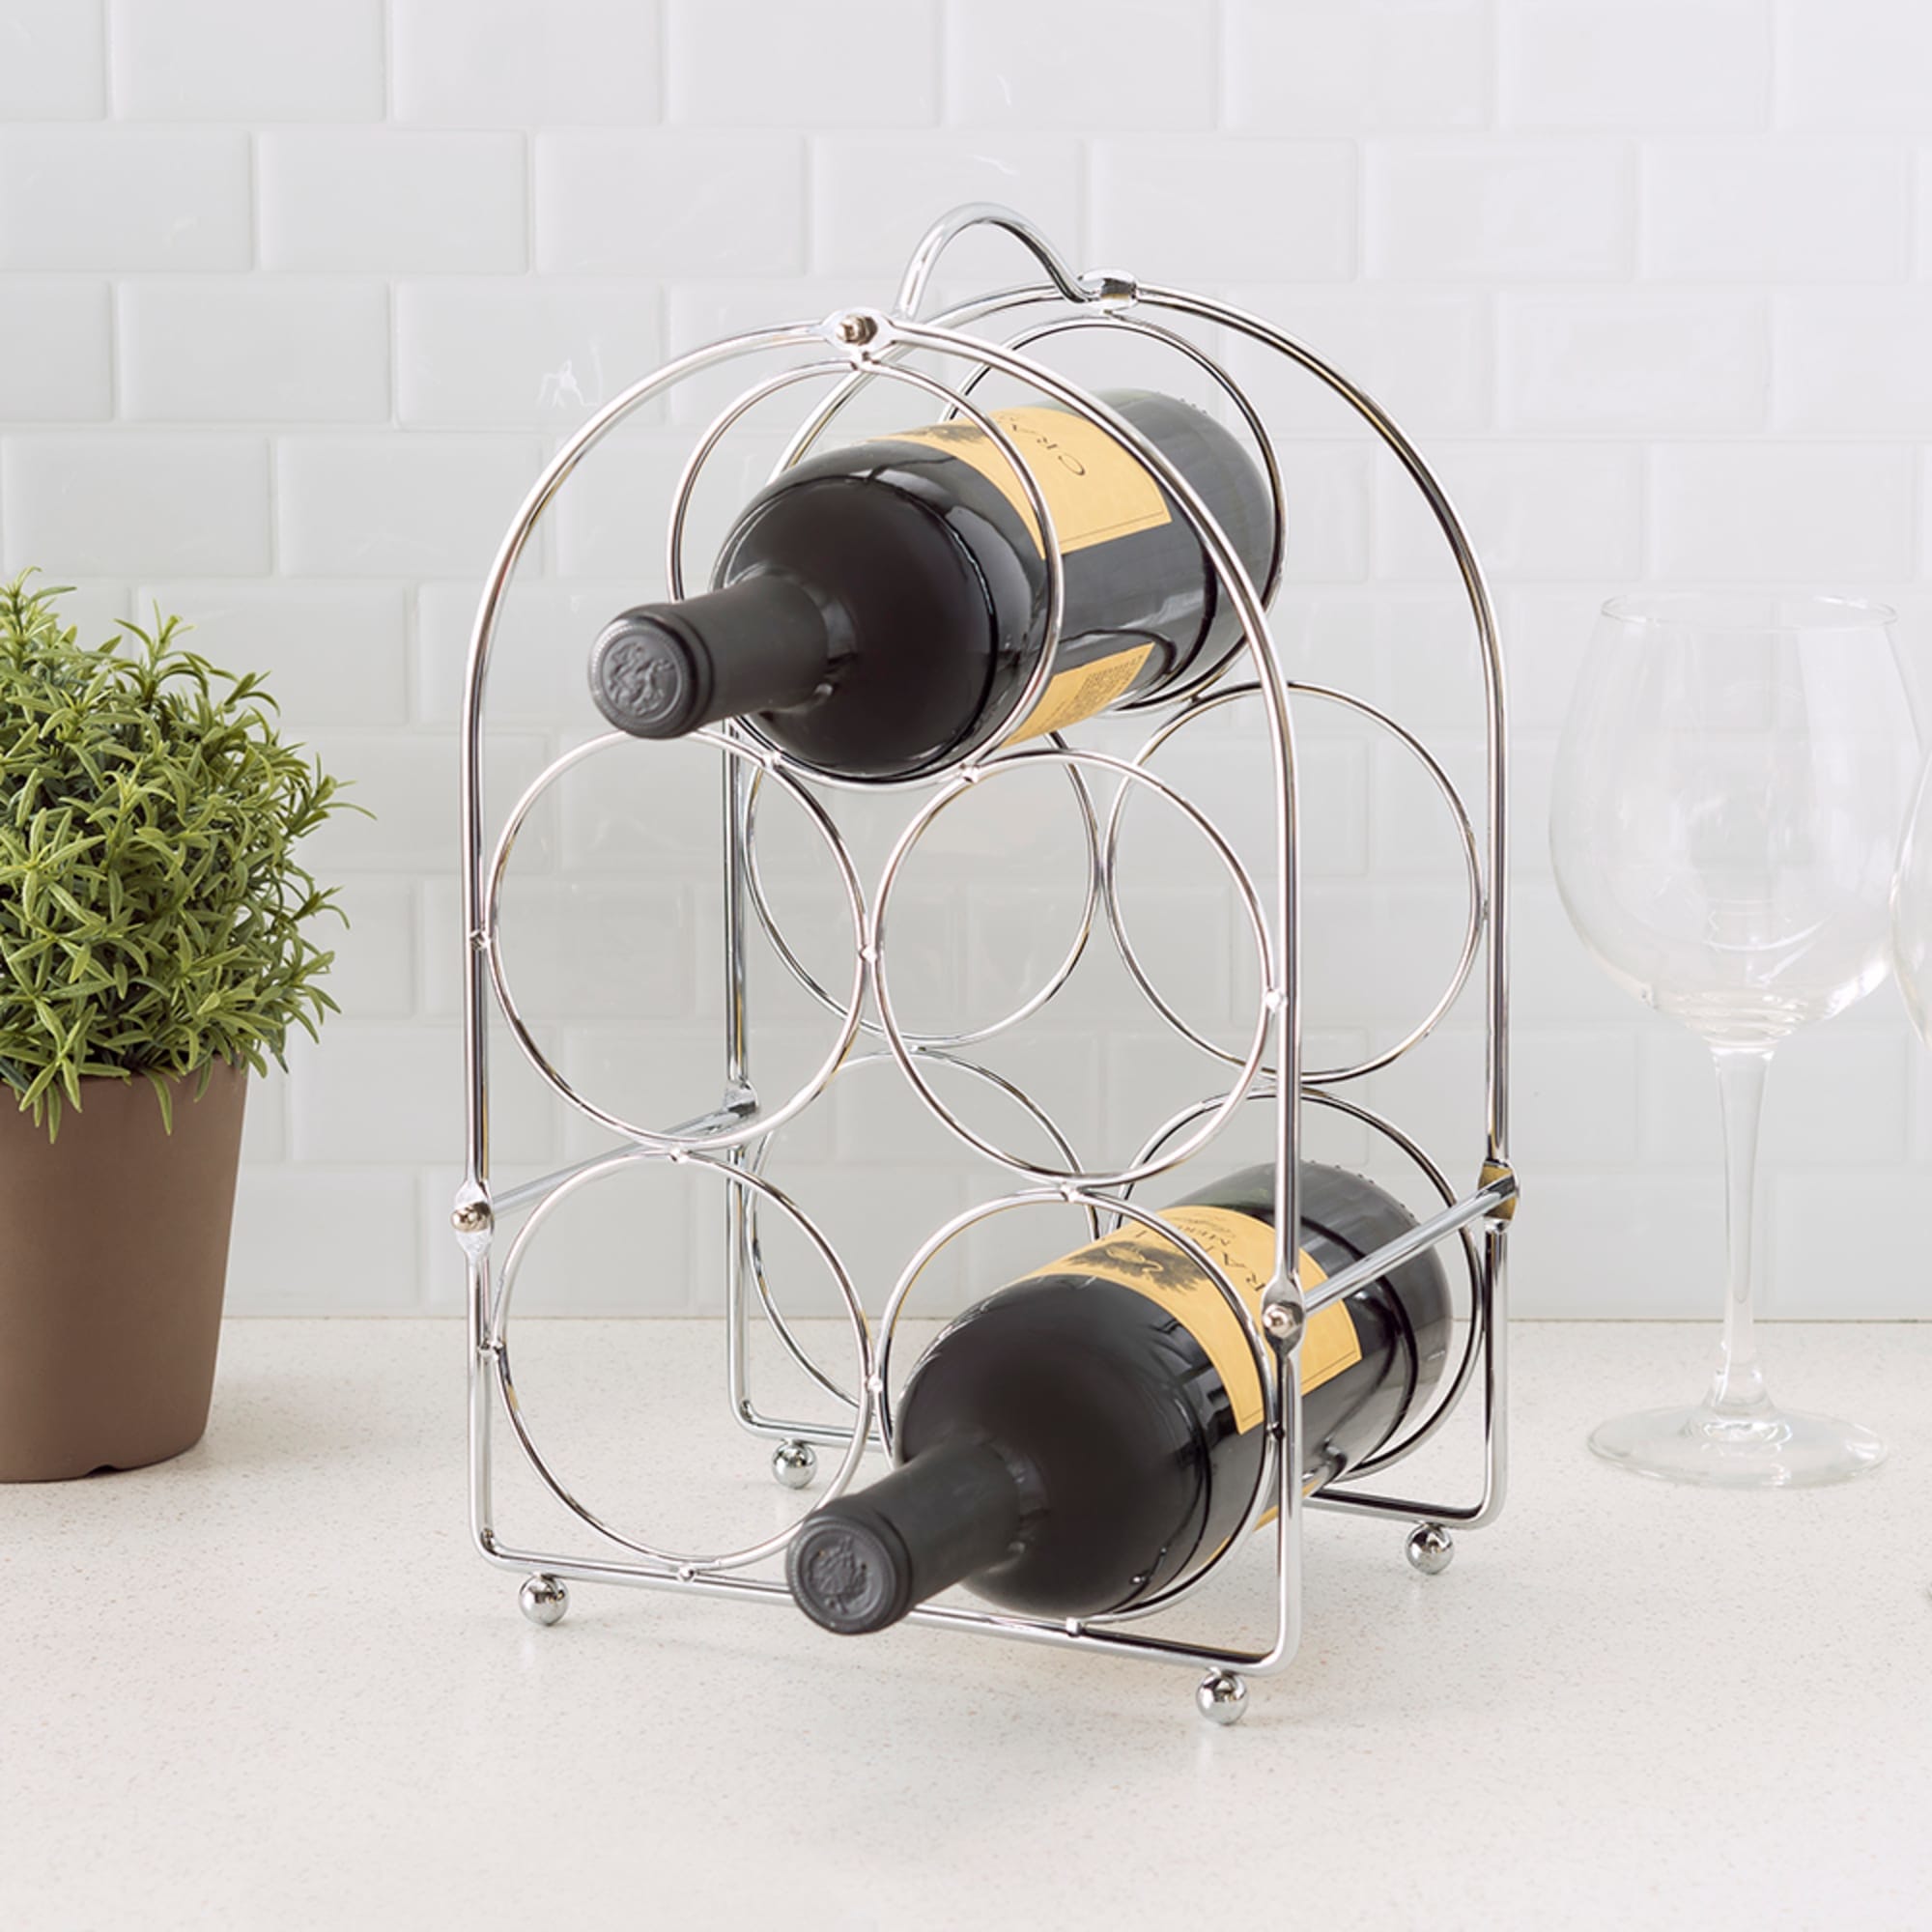 winerack - gadgets, gifts, decoration